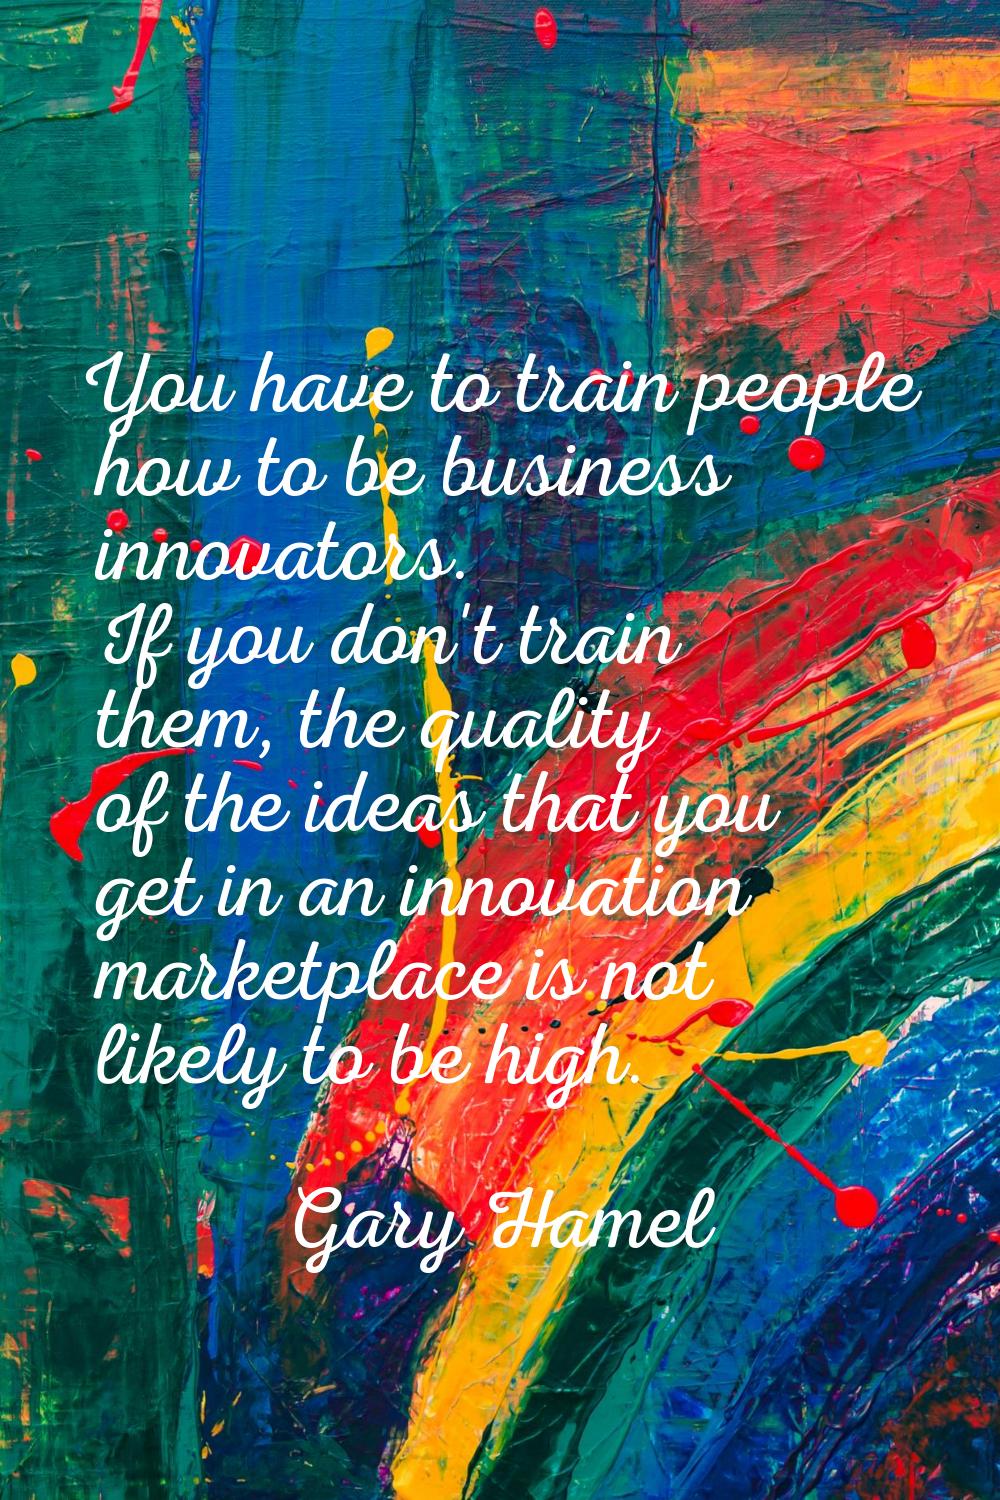 You have to train people how to be business innovators. If you don't train them, the quality of the